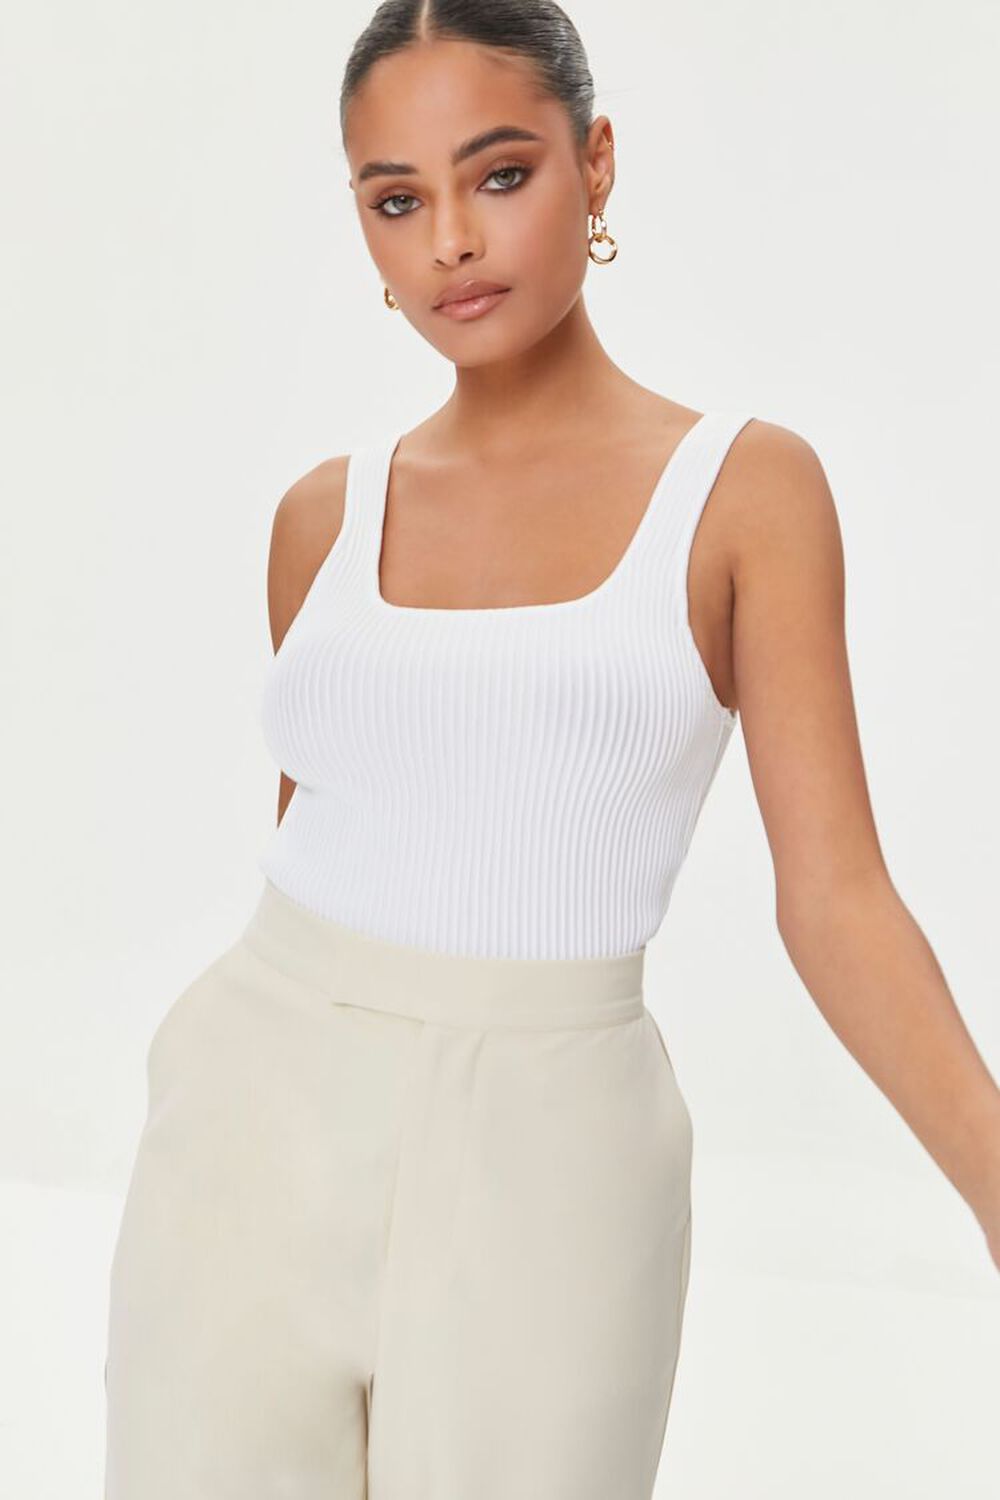 WHITE Ribbed Sweater-Knit Tank Top, image 1